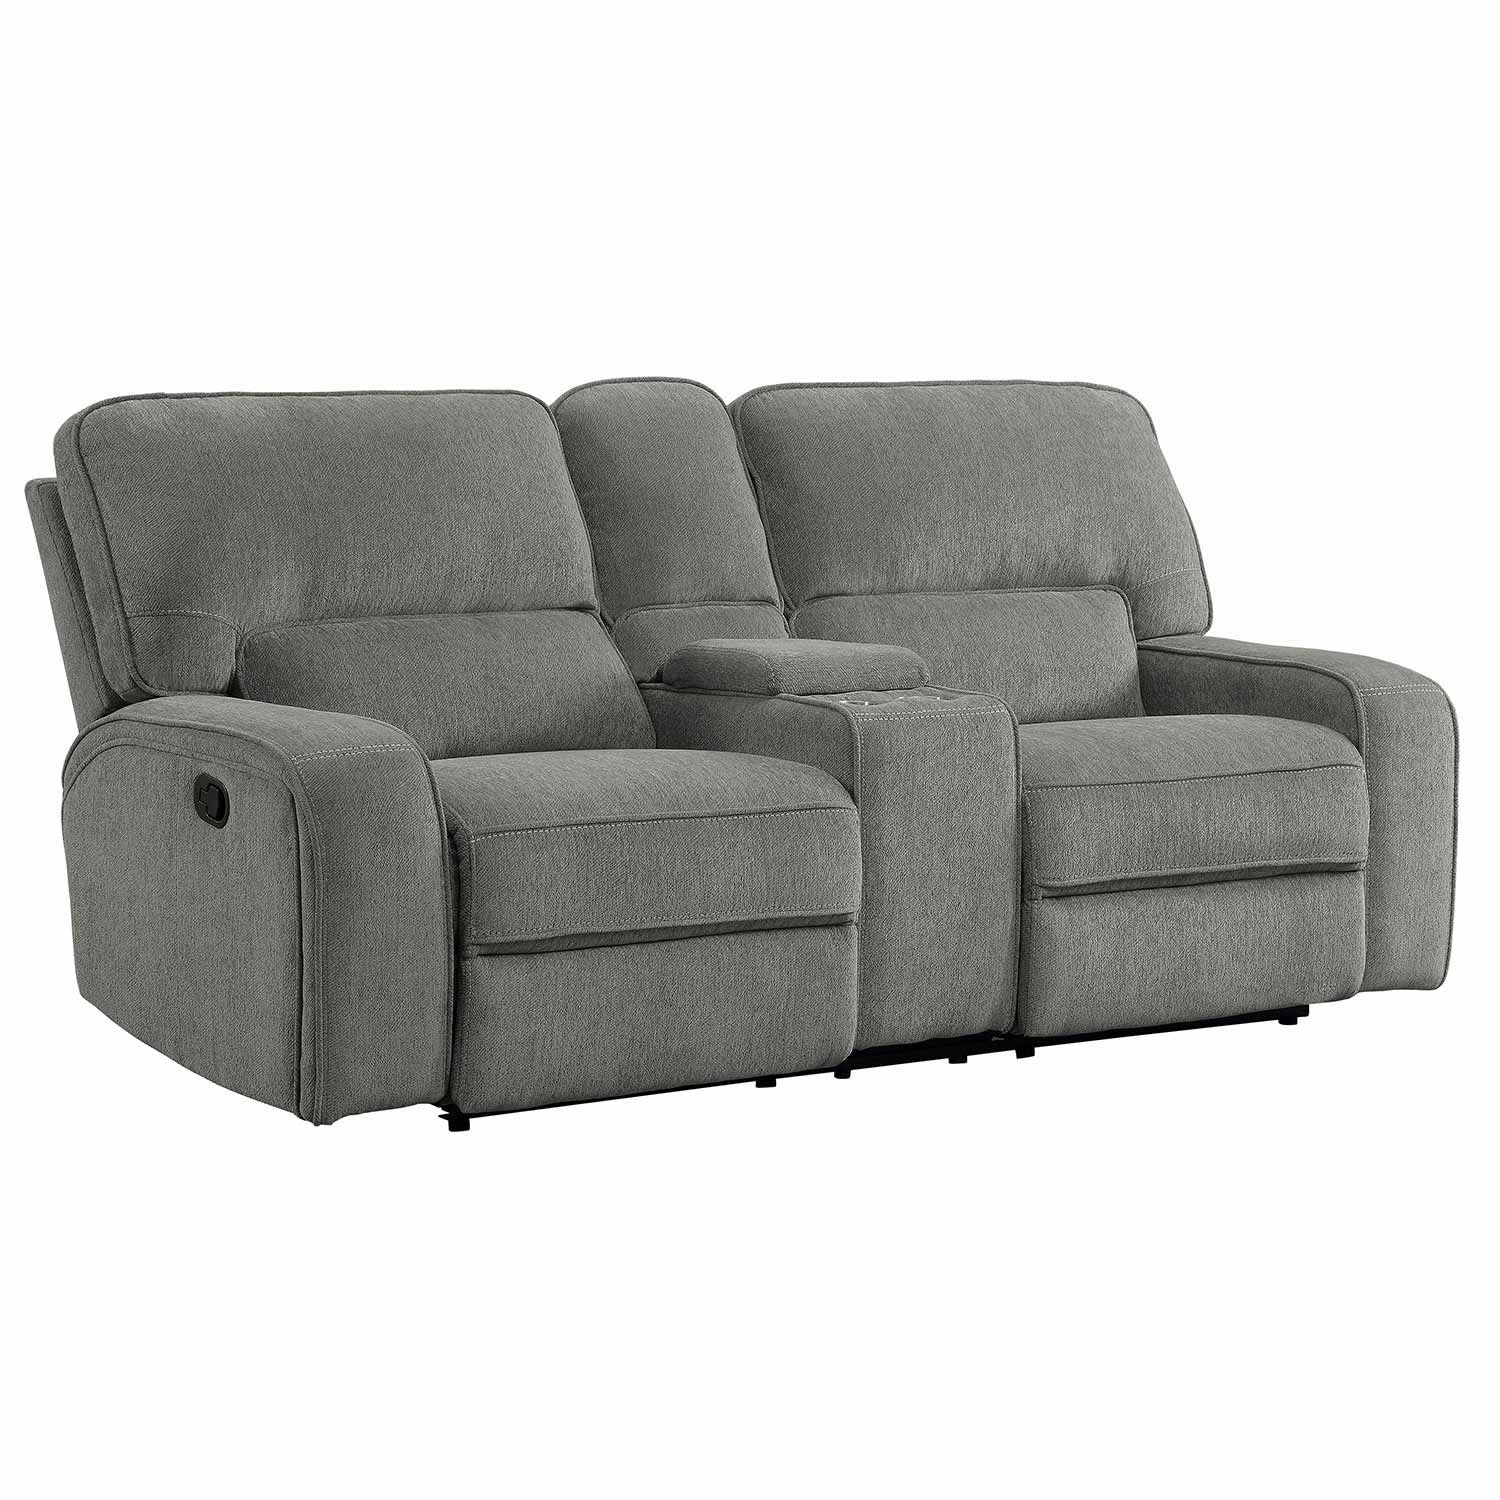 Homelegance Borneo Power Double Reclining Love Seat with Center Console and Power Headrests - Mocha